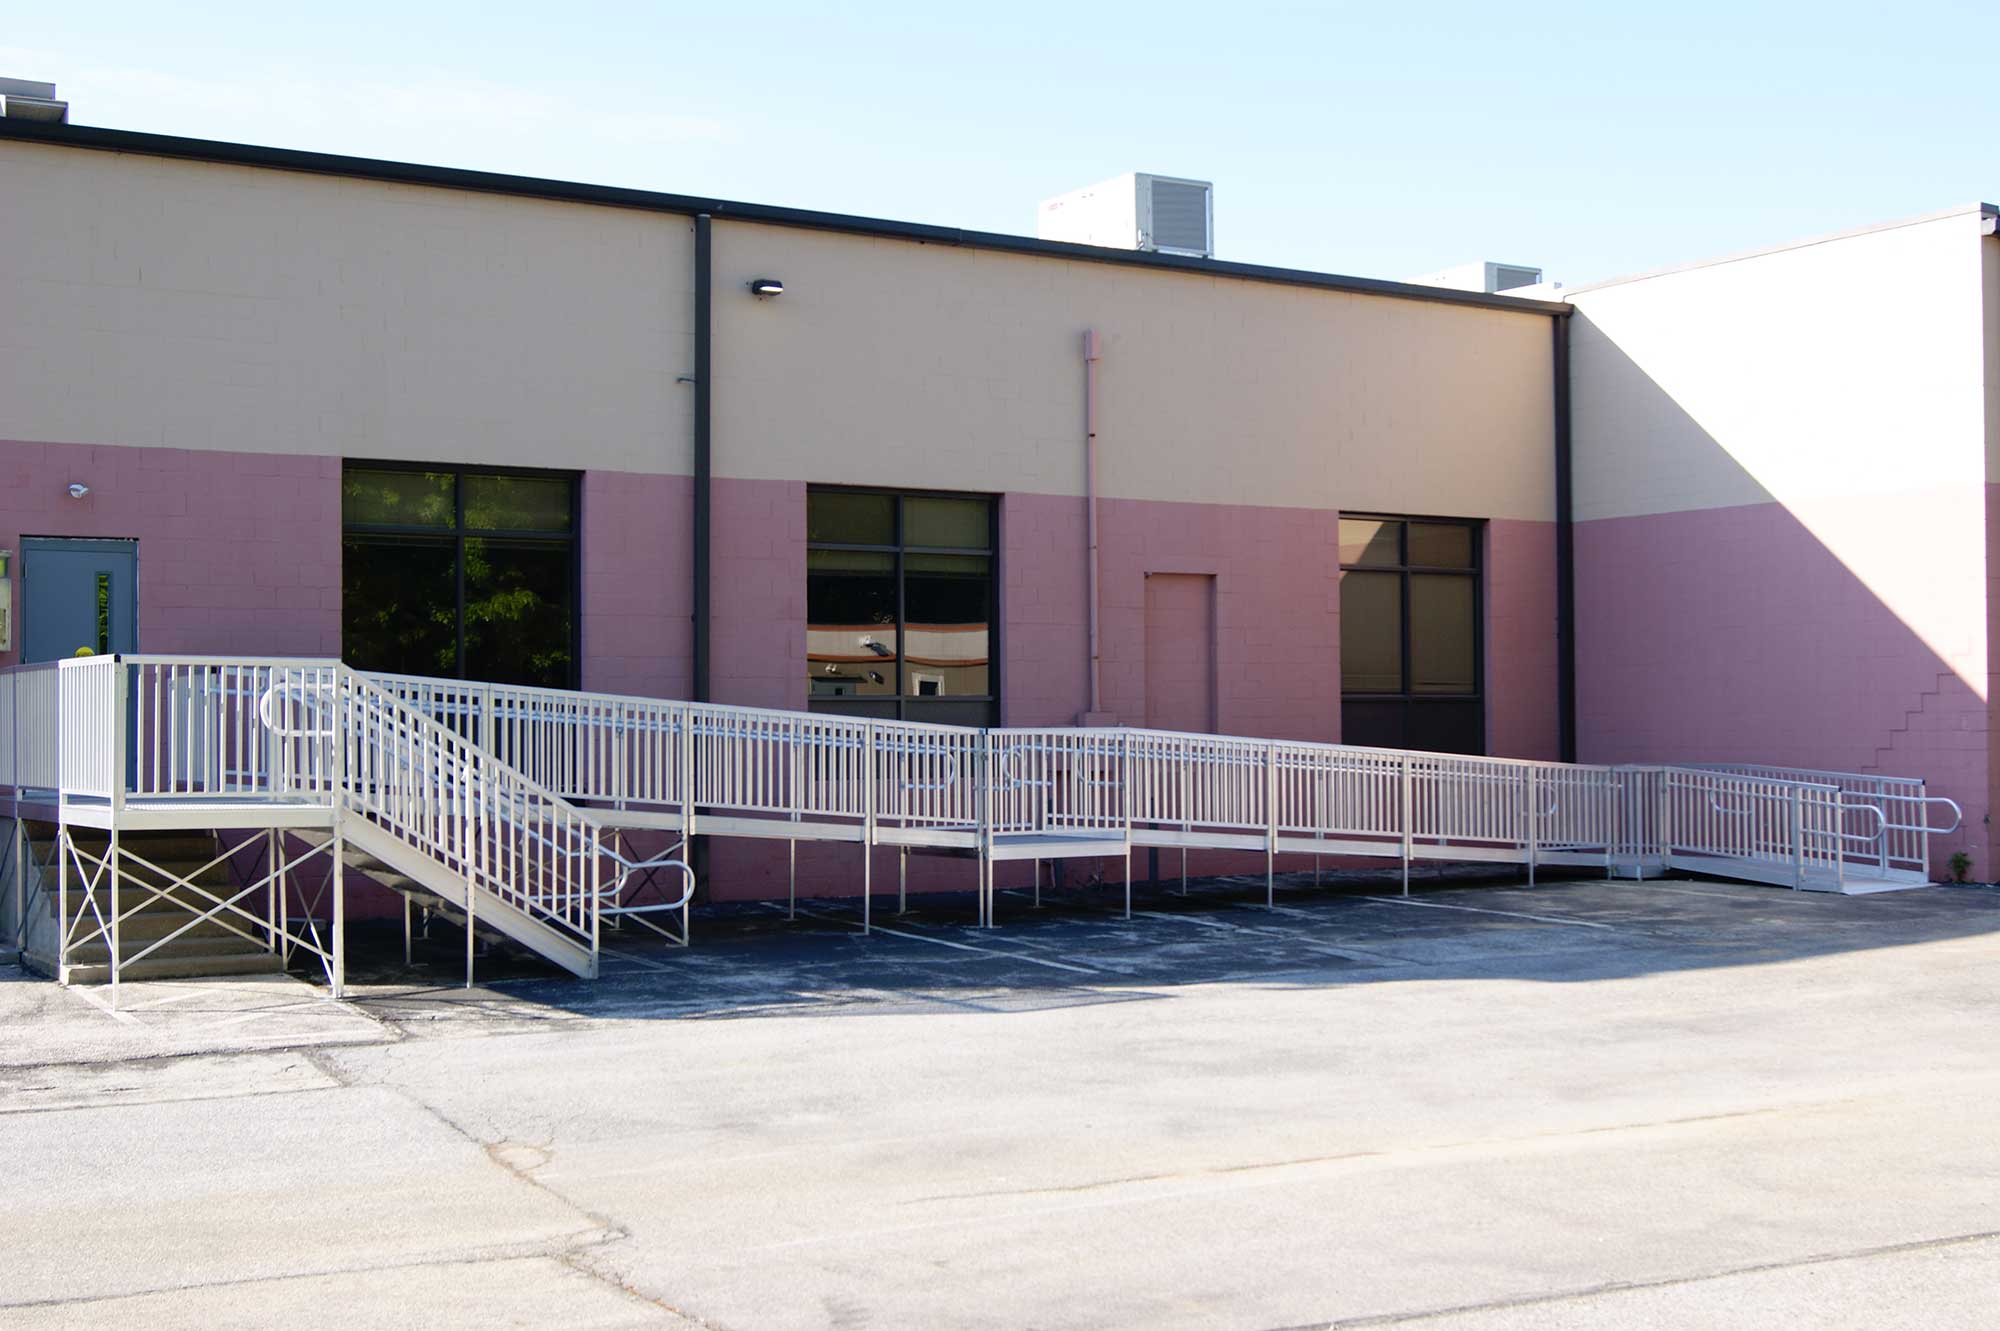 Latitude Picture of a Fully Accessible Building with a Large Wheelchair Ramp